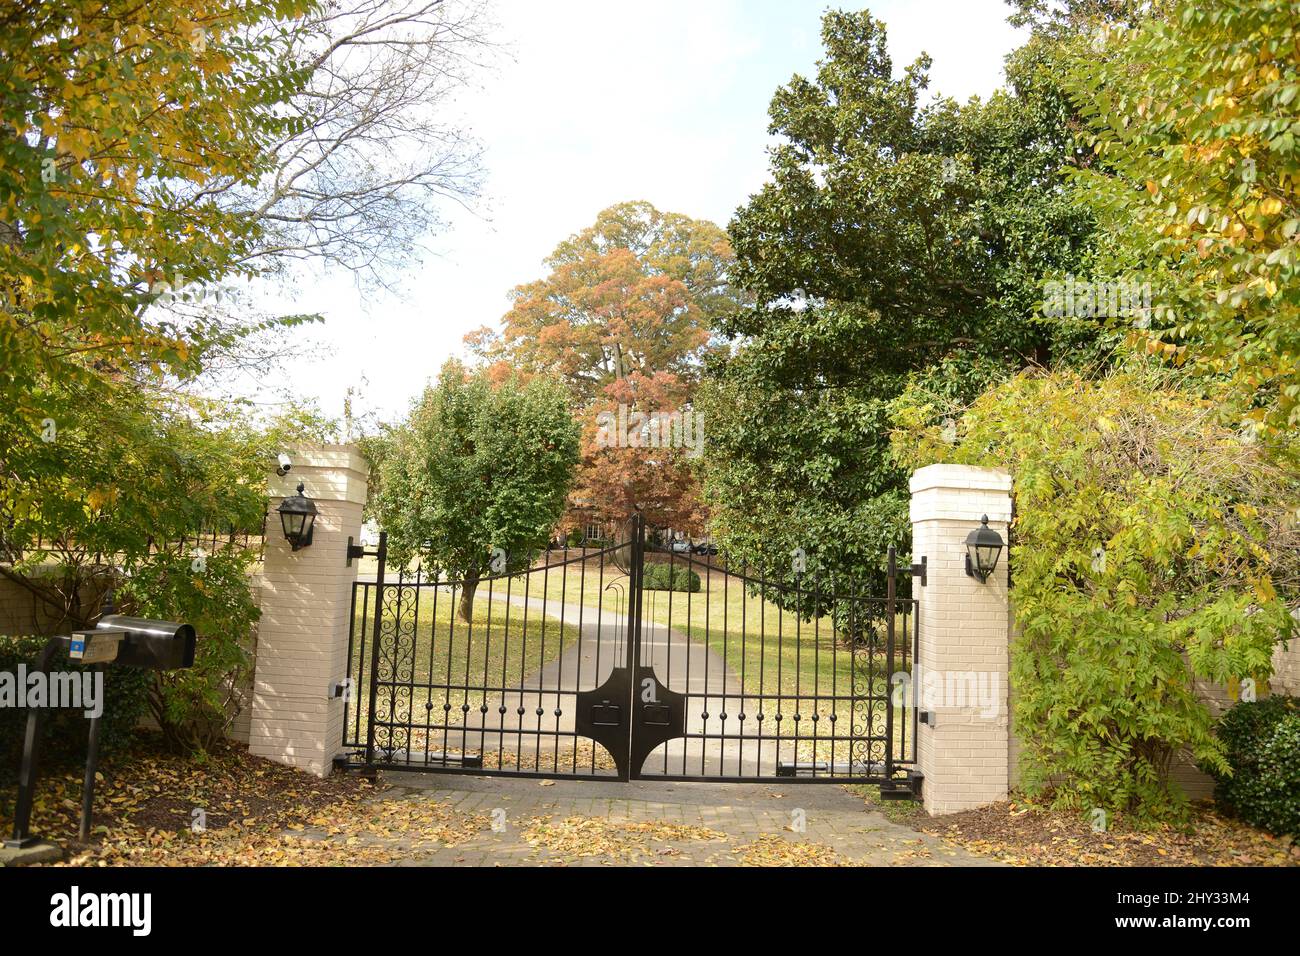 An overhead view of Martina McBride's Nashville Home Guard Gate in Tennessee. Stock Photo